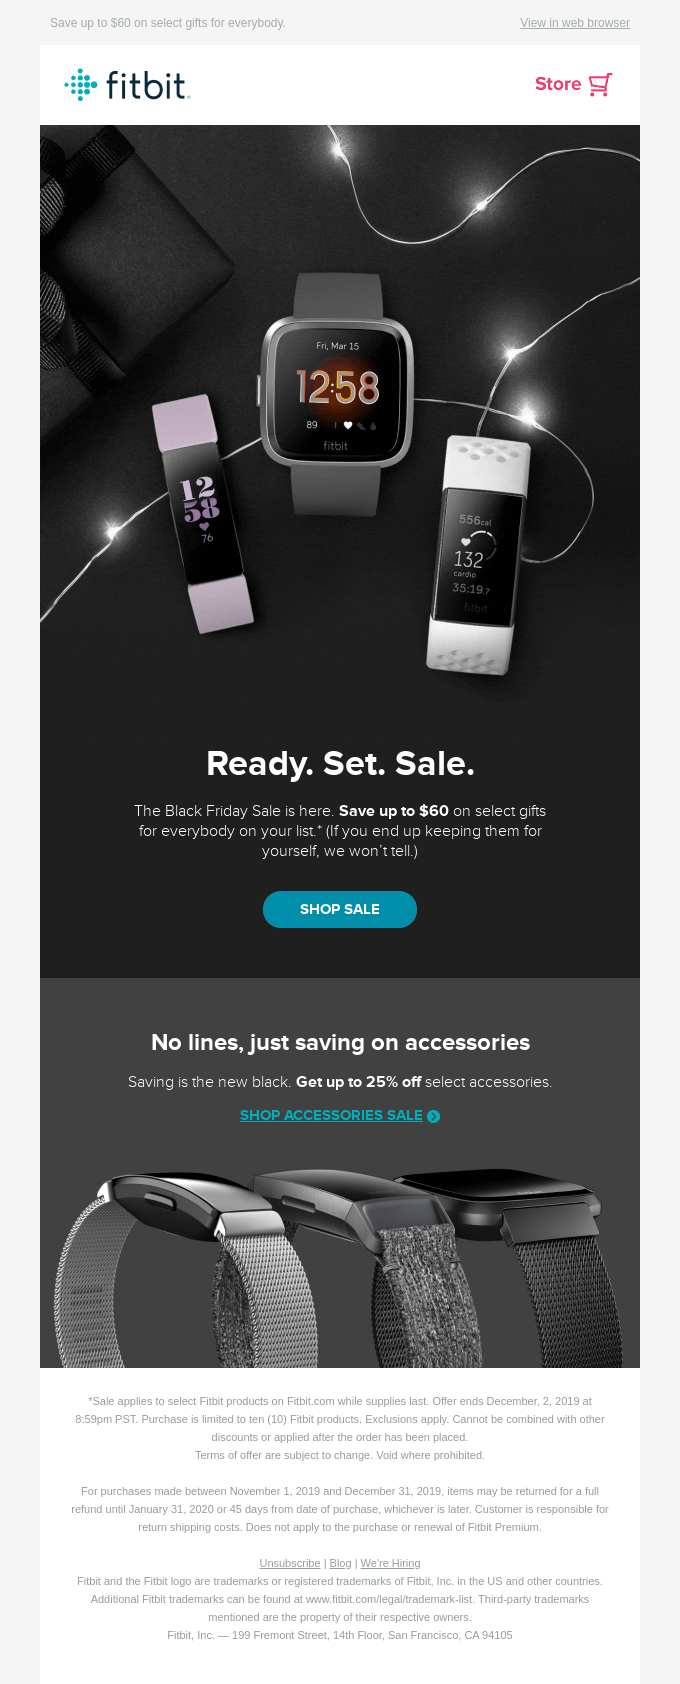 The Black Friday Sale is on